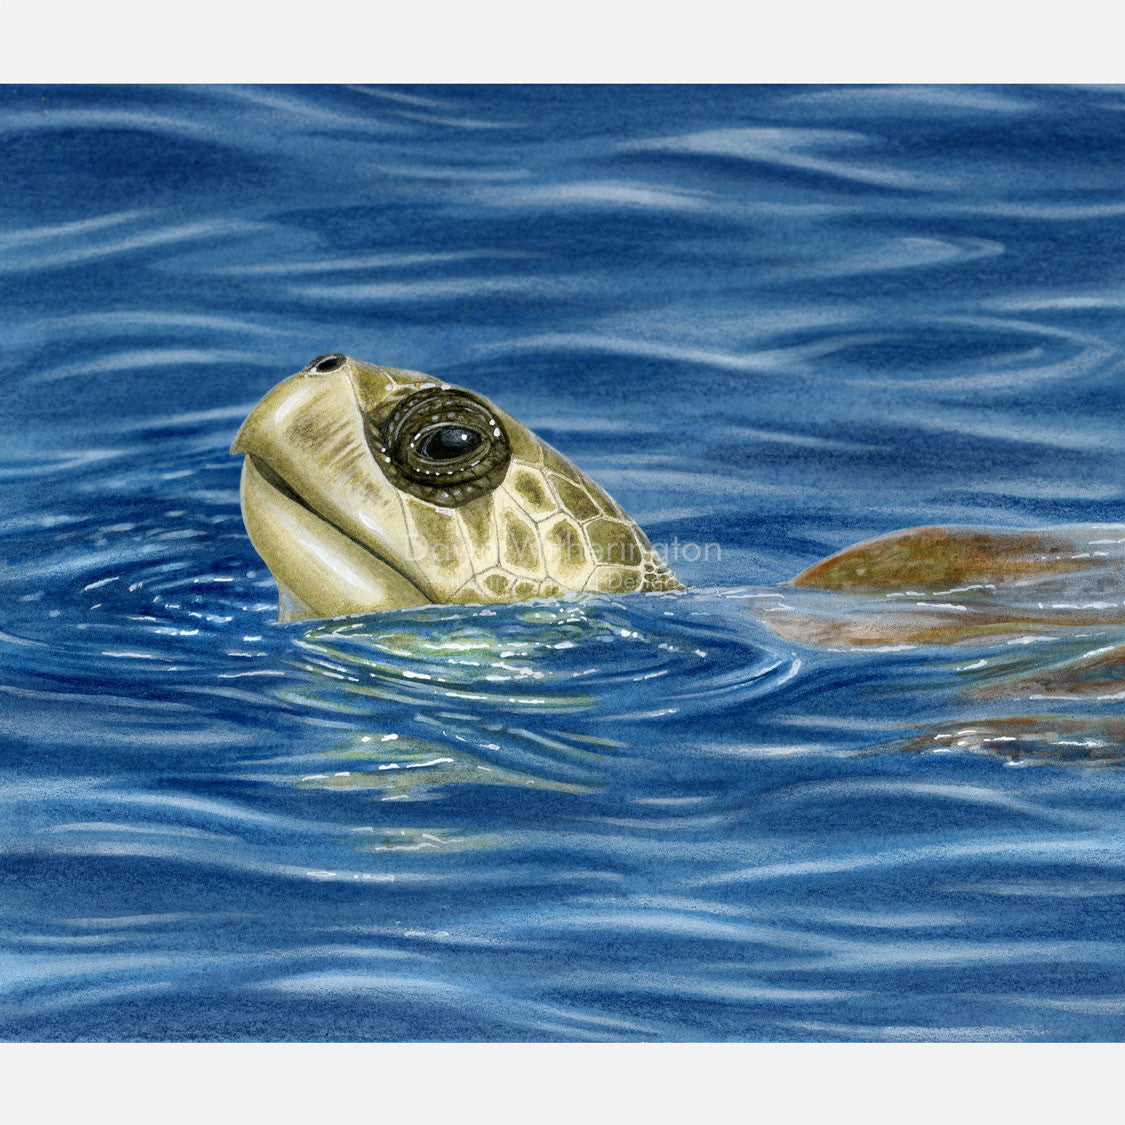 This beautiful, accurately detailed illustration is of a basking olive ridley sea turtle, lepidochelys oliveacea.